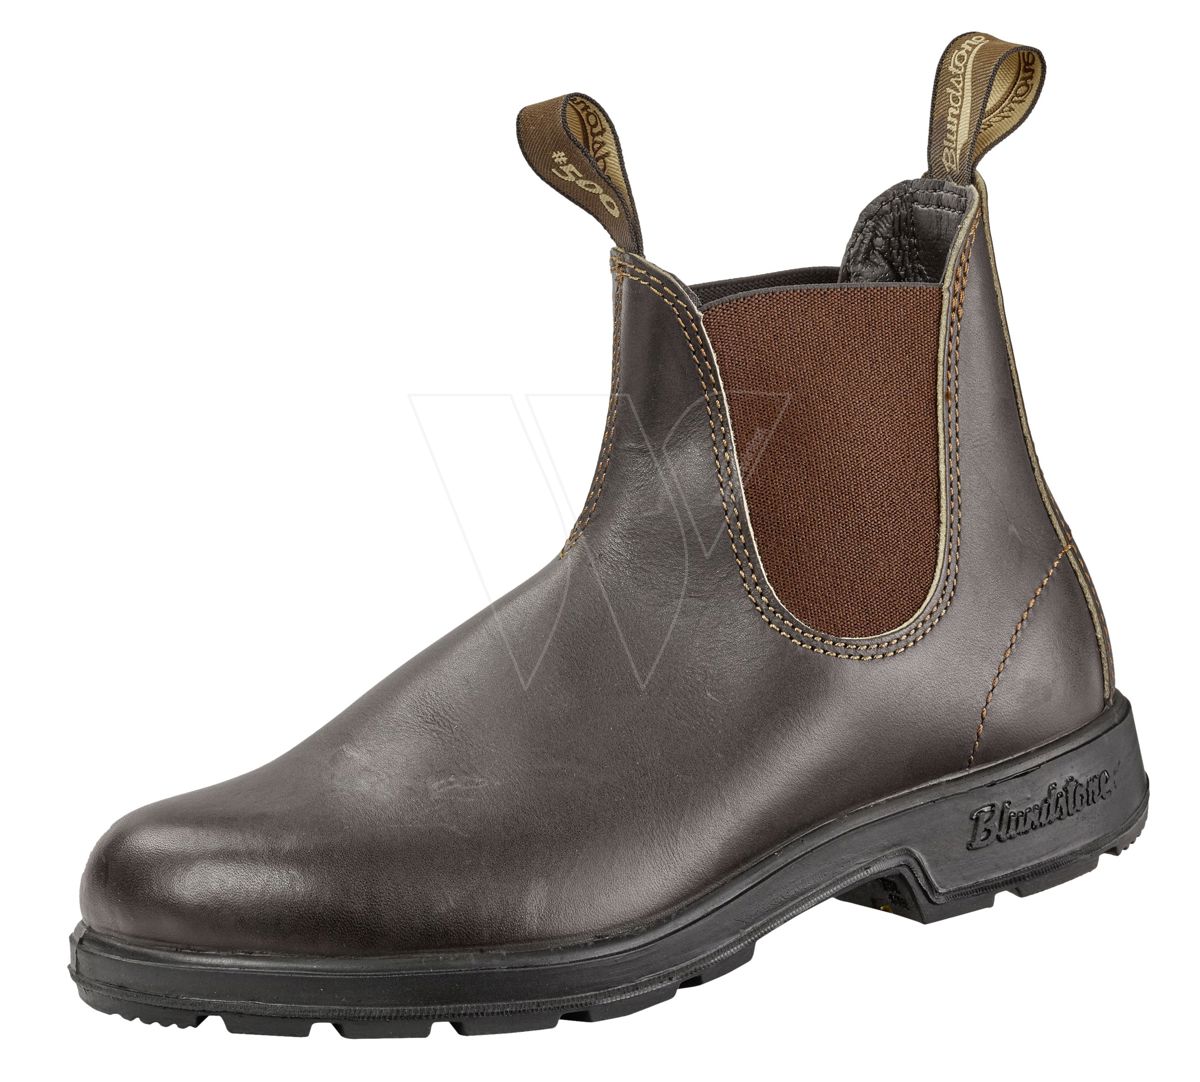 Blundstone 500 shoes size 45